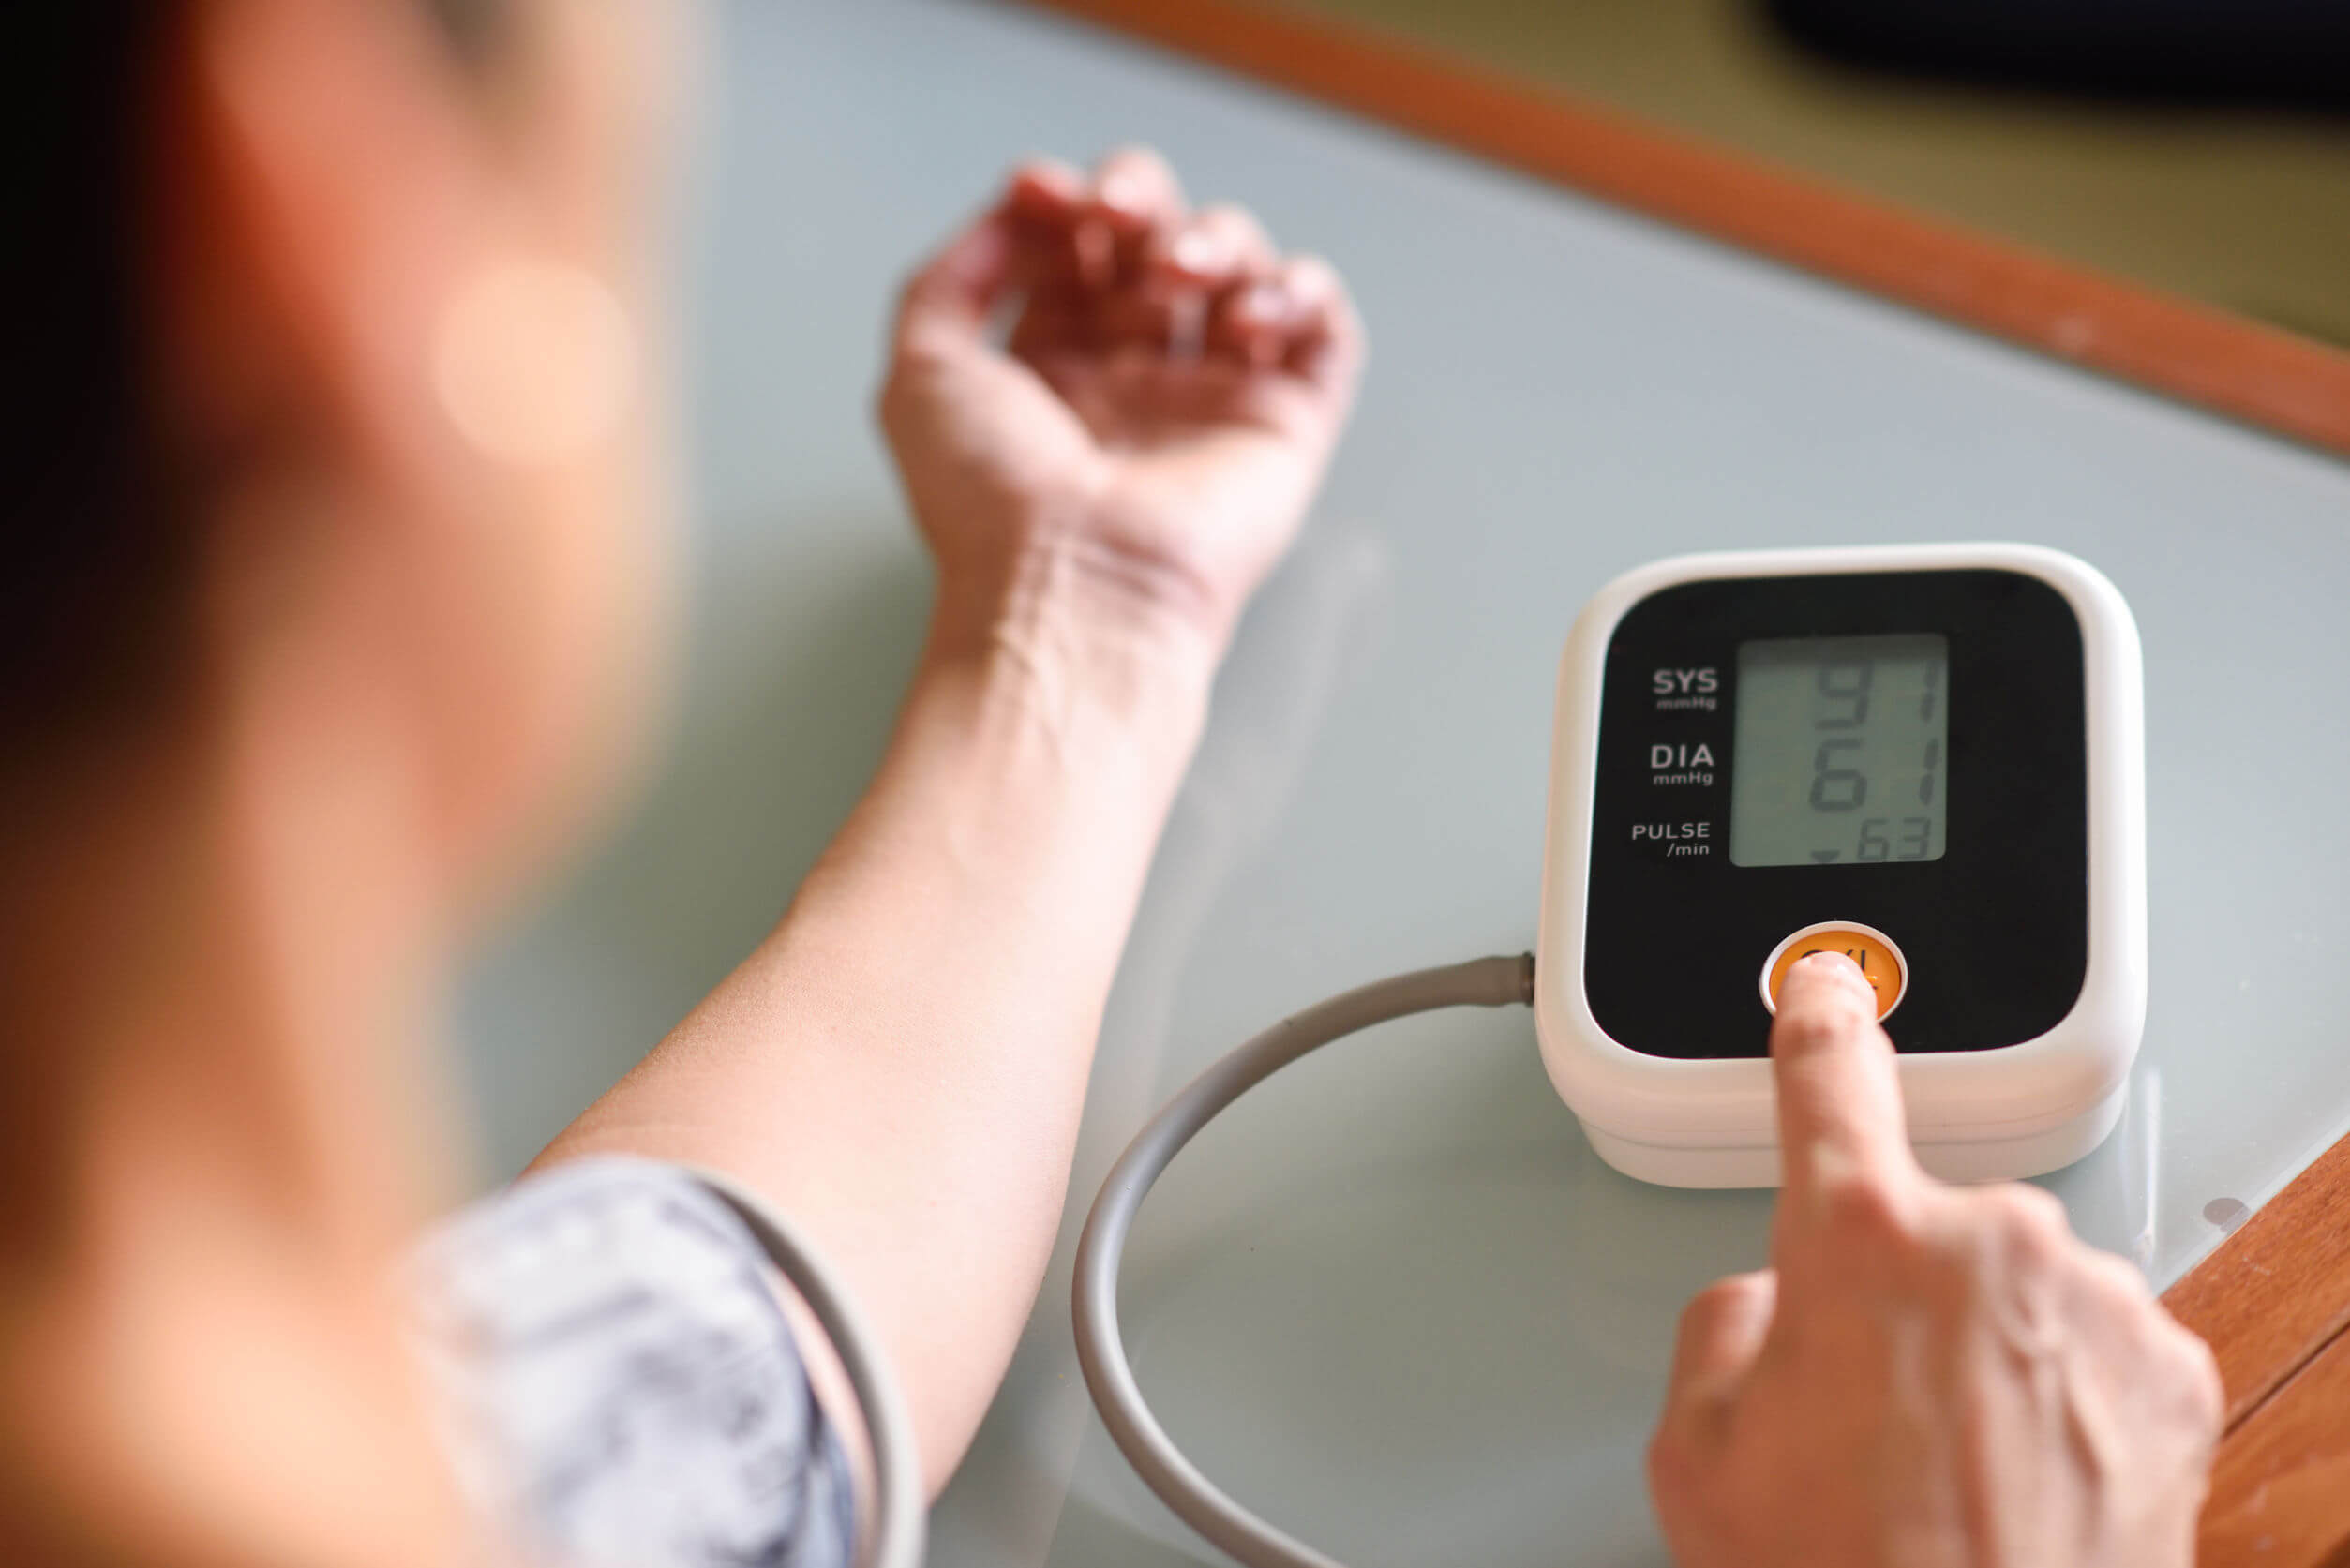 Taking blood pressure at home can diagnose hypertension